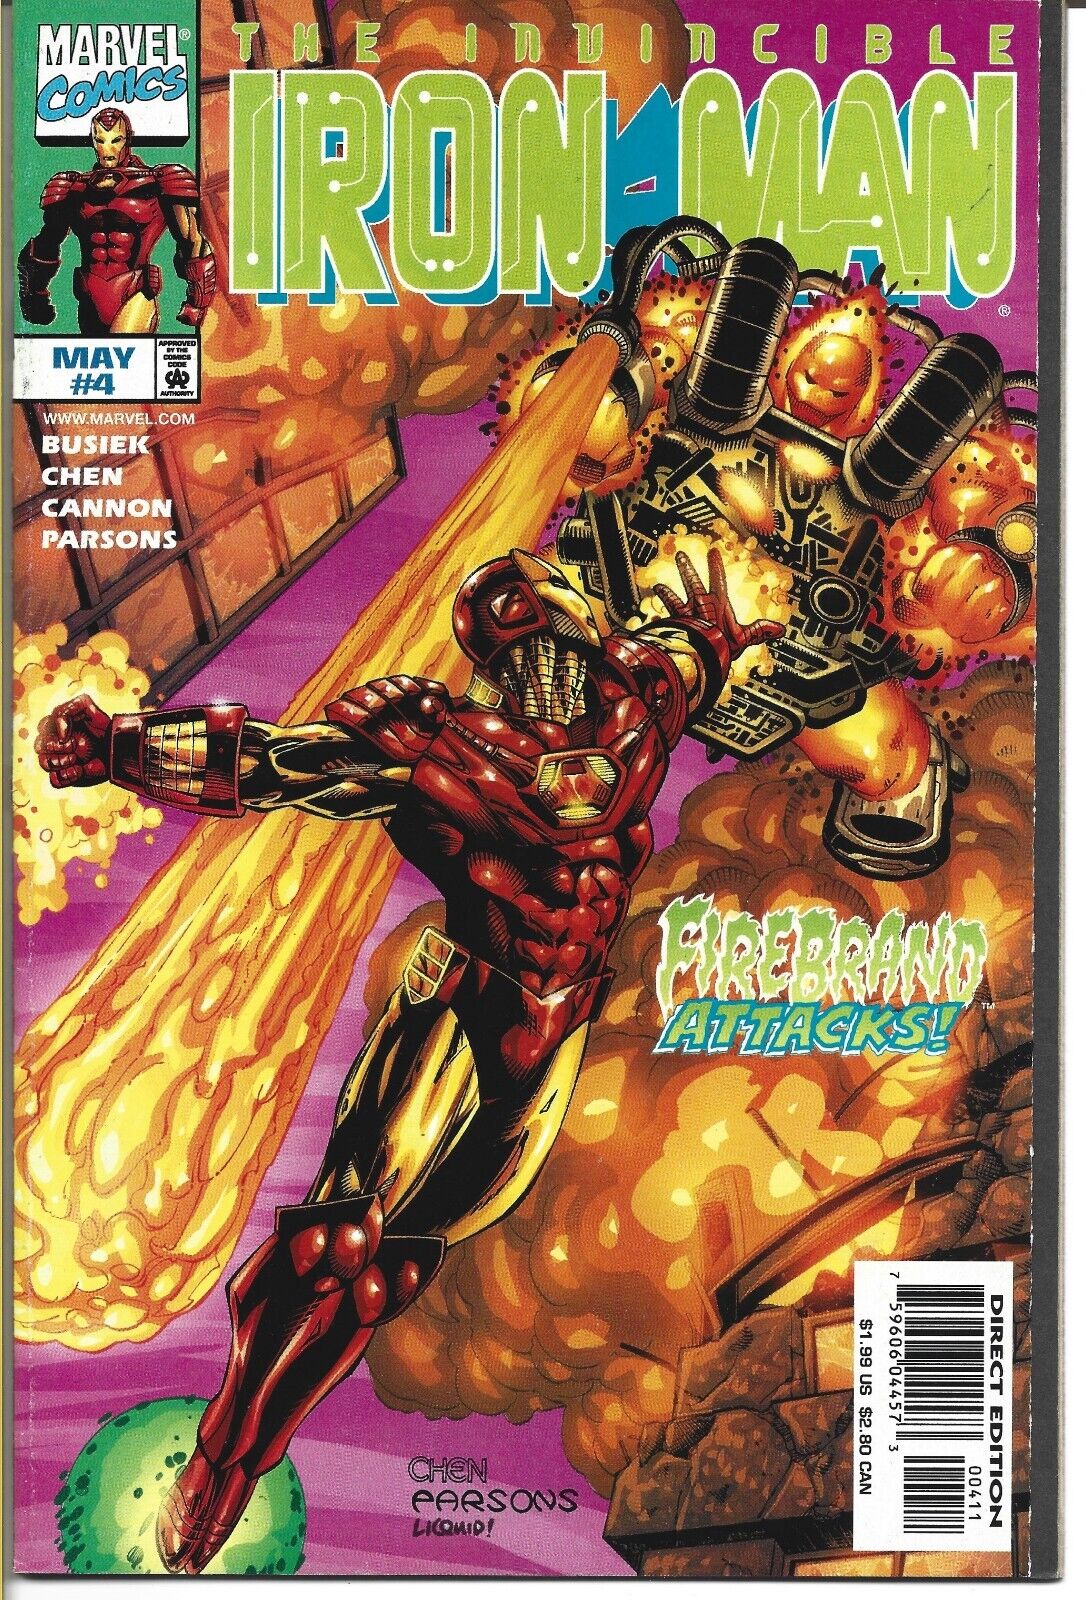 THE INVINCIBLE IRON MAN #4 MARVEL COMICS 1998 BAGGED & BOARDED